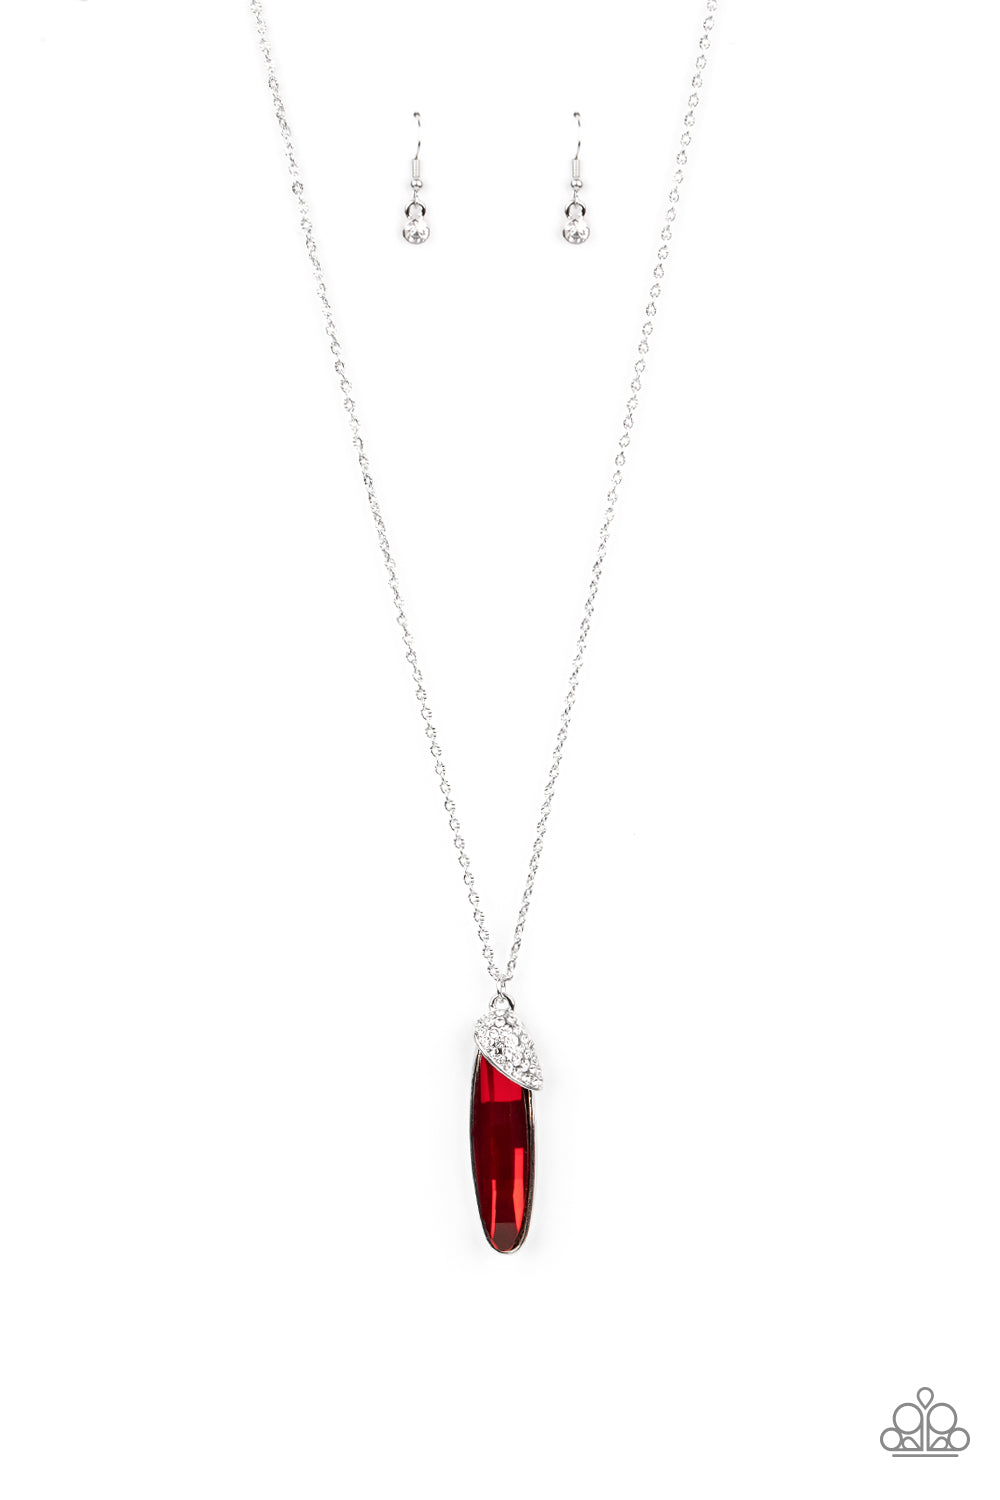 Paparazzi Accessories - Spontaneous Sparkle - Red Necklace - Alies Bling Bar